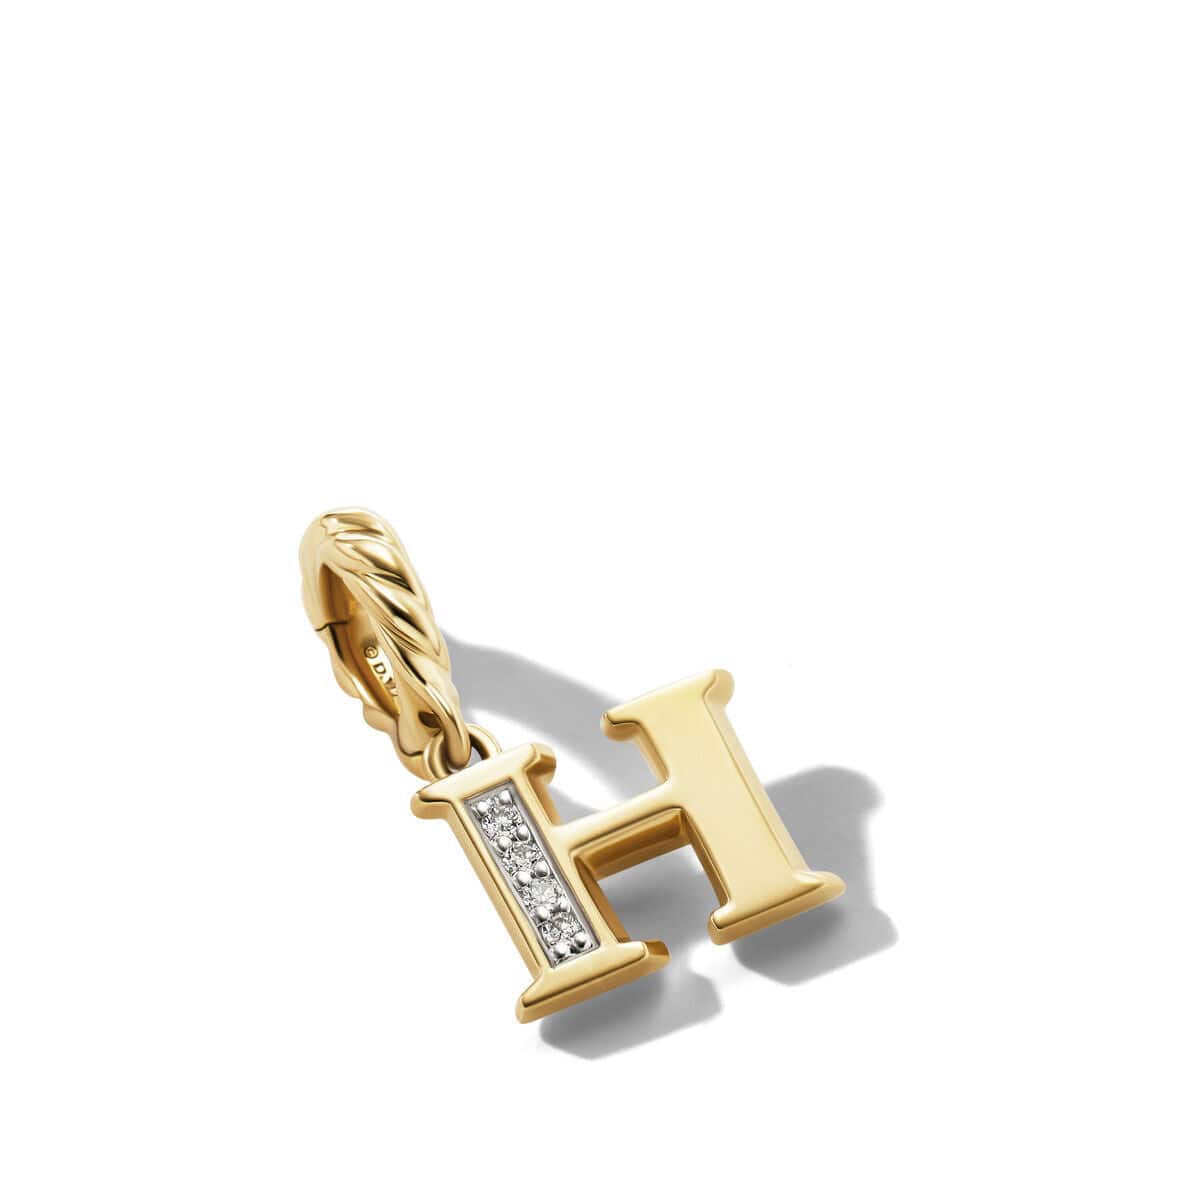 Pavé H Initial Pendant in 18K Yellow Gold with Diamonds